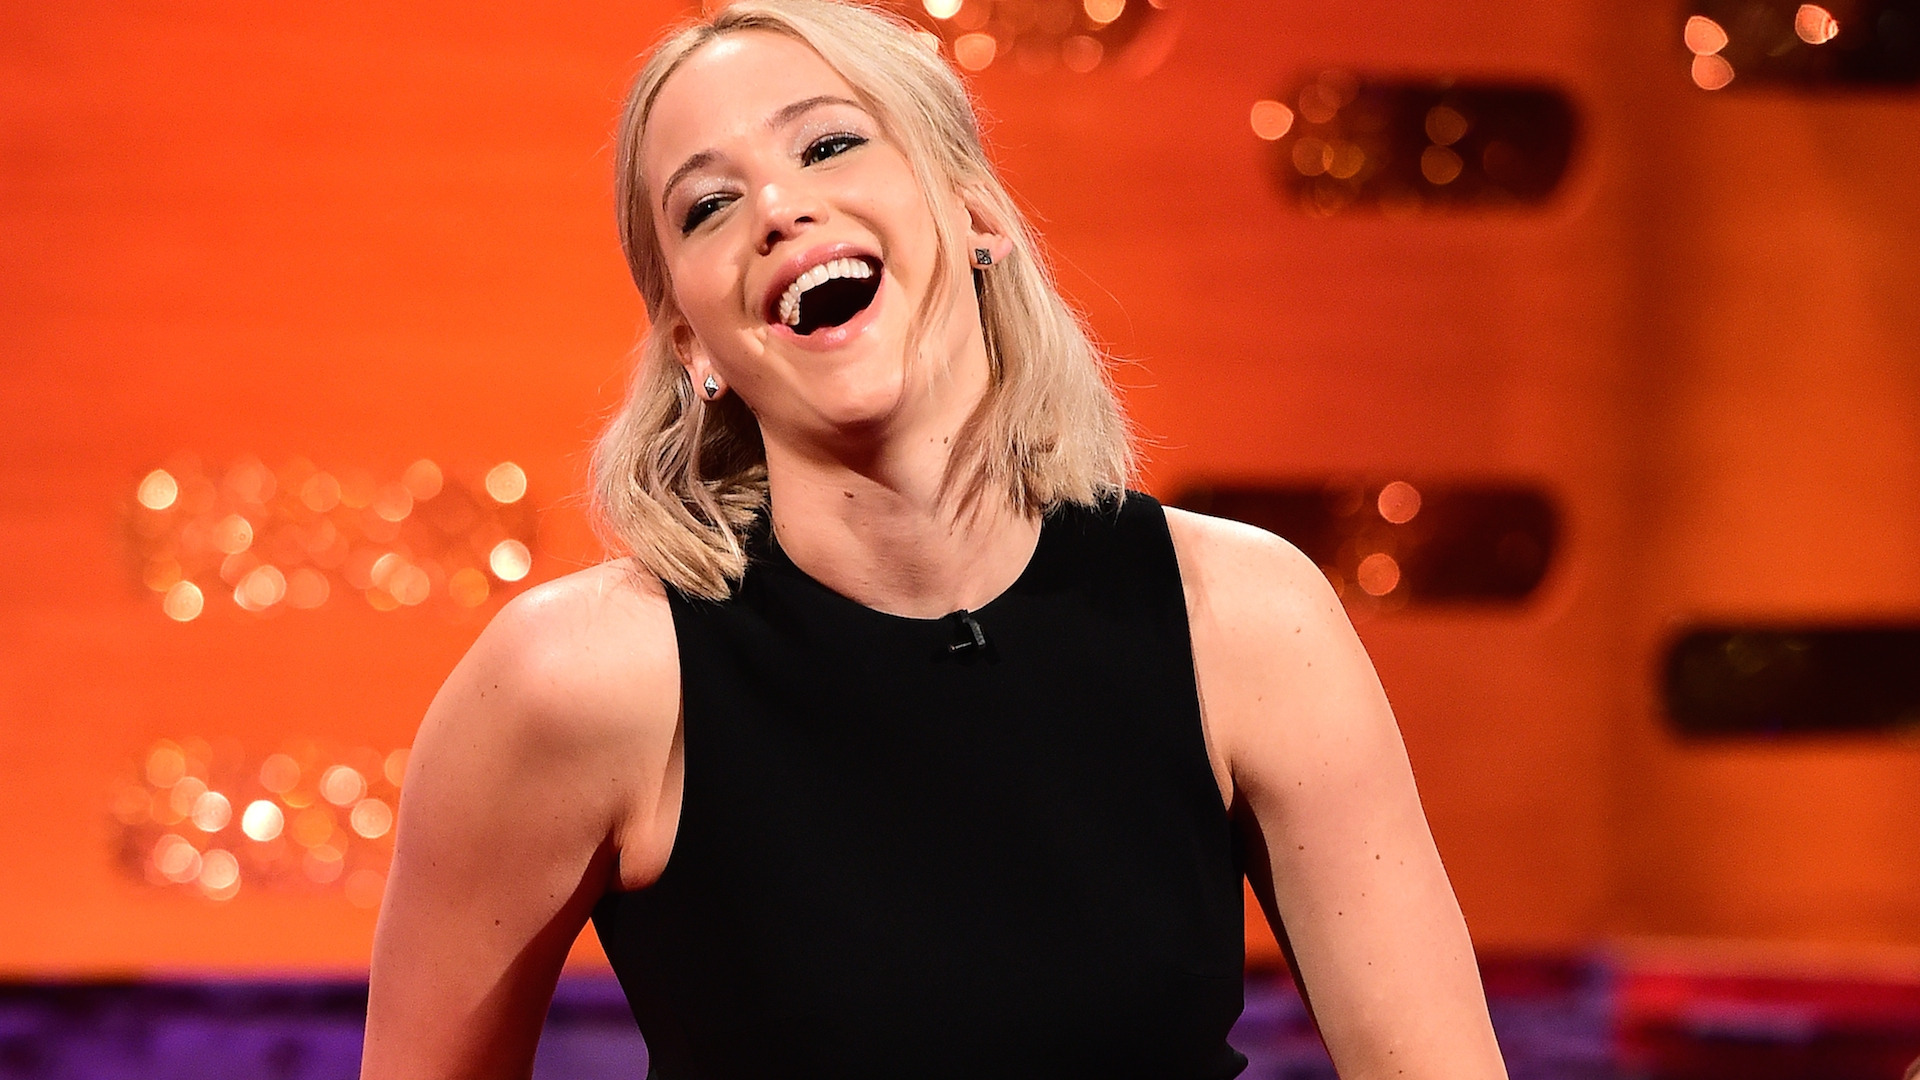 The Graham Norton Show - London. Jennifer Lawrence during filming at the London Studios, London of The Graham Norton Show which is due to be transmitted on December 31 at 2245. Picture date: Thursday December 17 2015. Photo credit should read: PA Images on behalf of So TV. URN:25122688